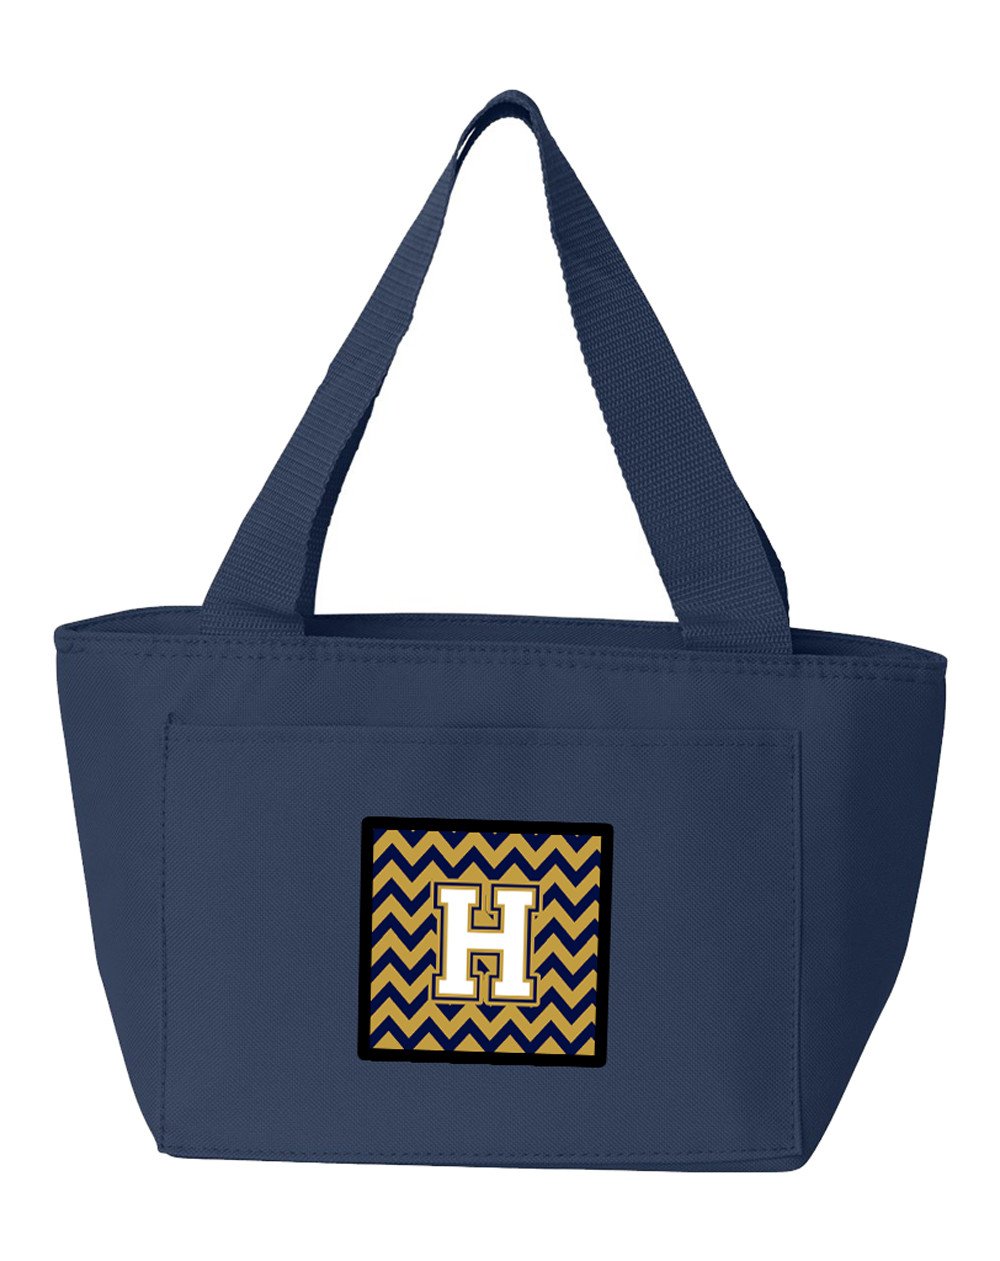 Letter H Chevron Navy Blue and Gold Lunch Bag CJ1057-HNA-8808 by Caroline's Treasures